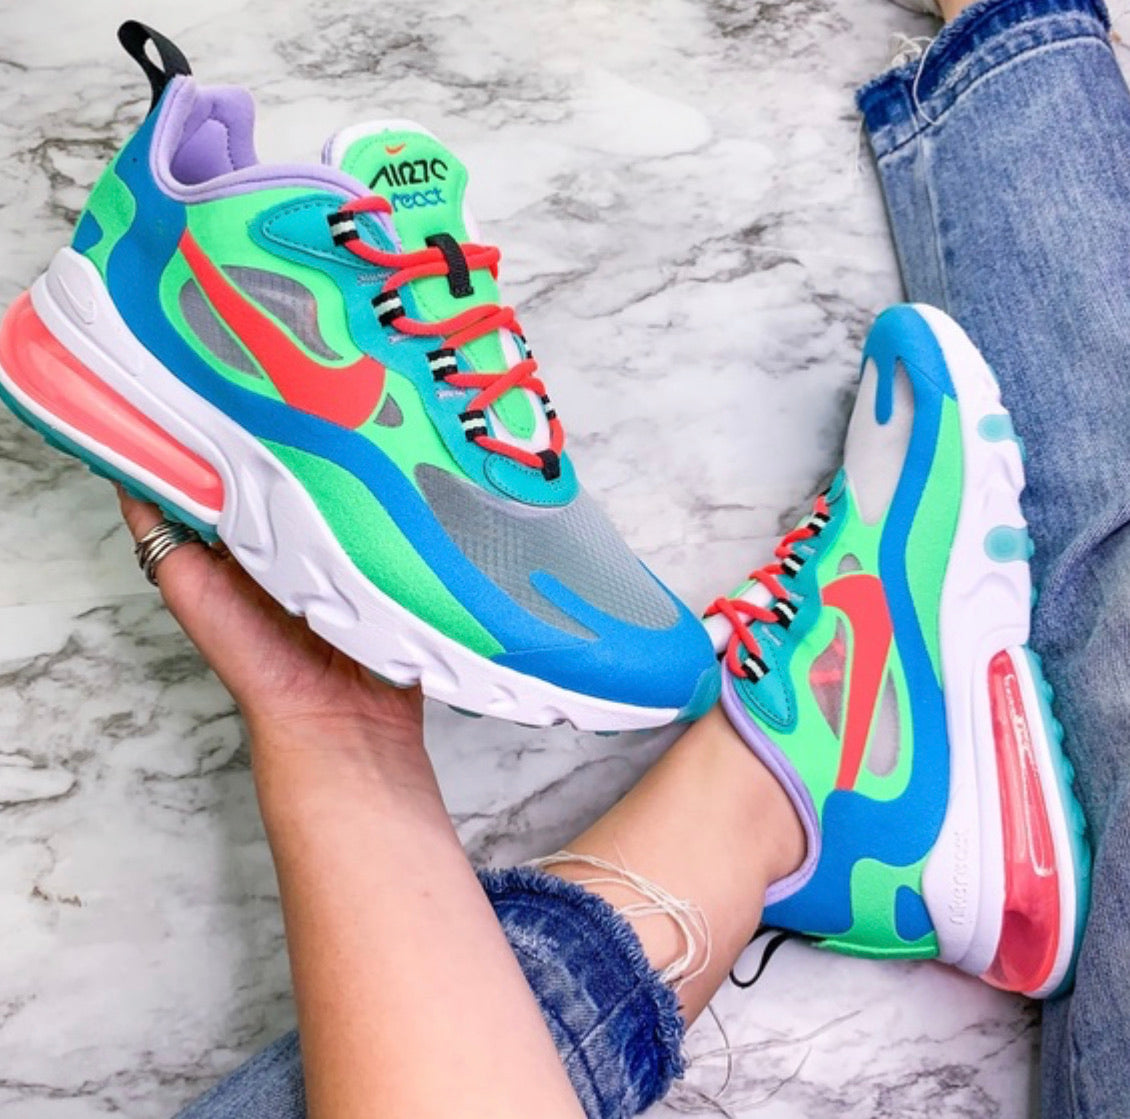 psychedelic air max 270